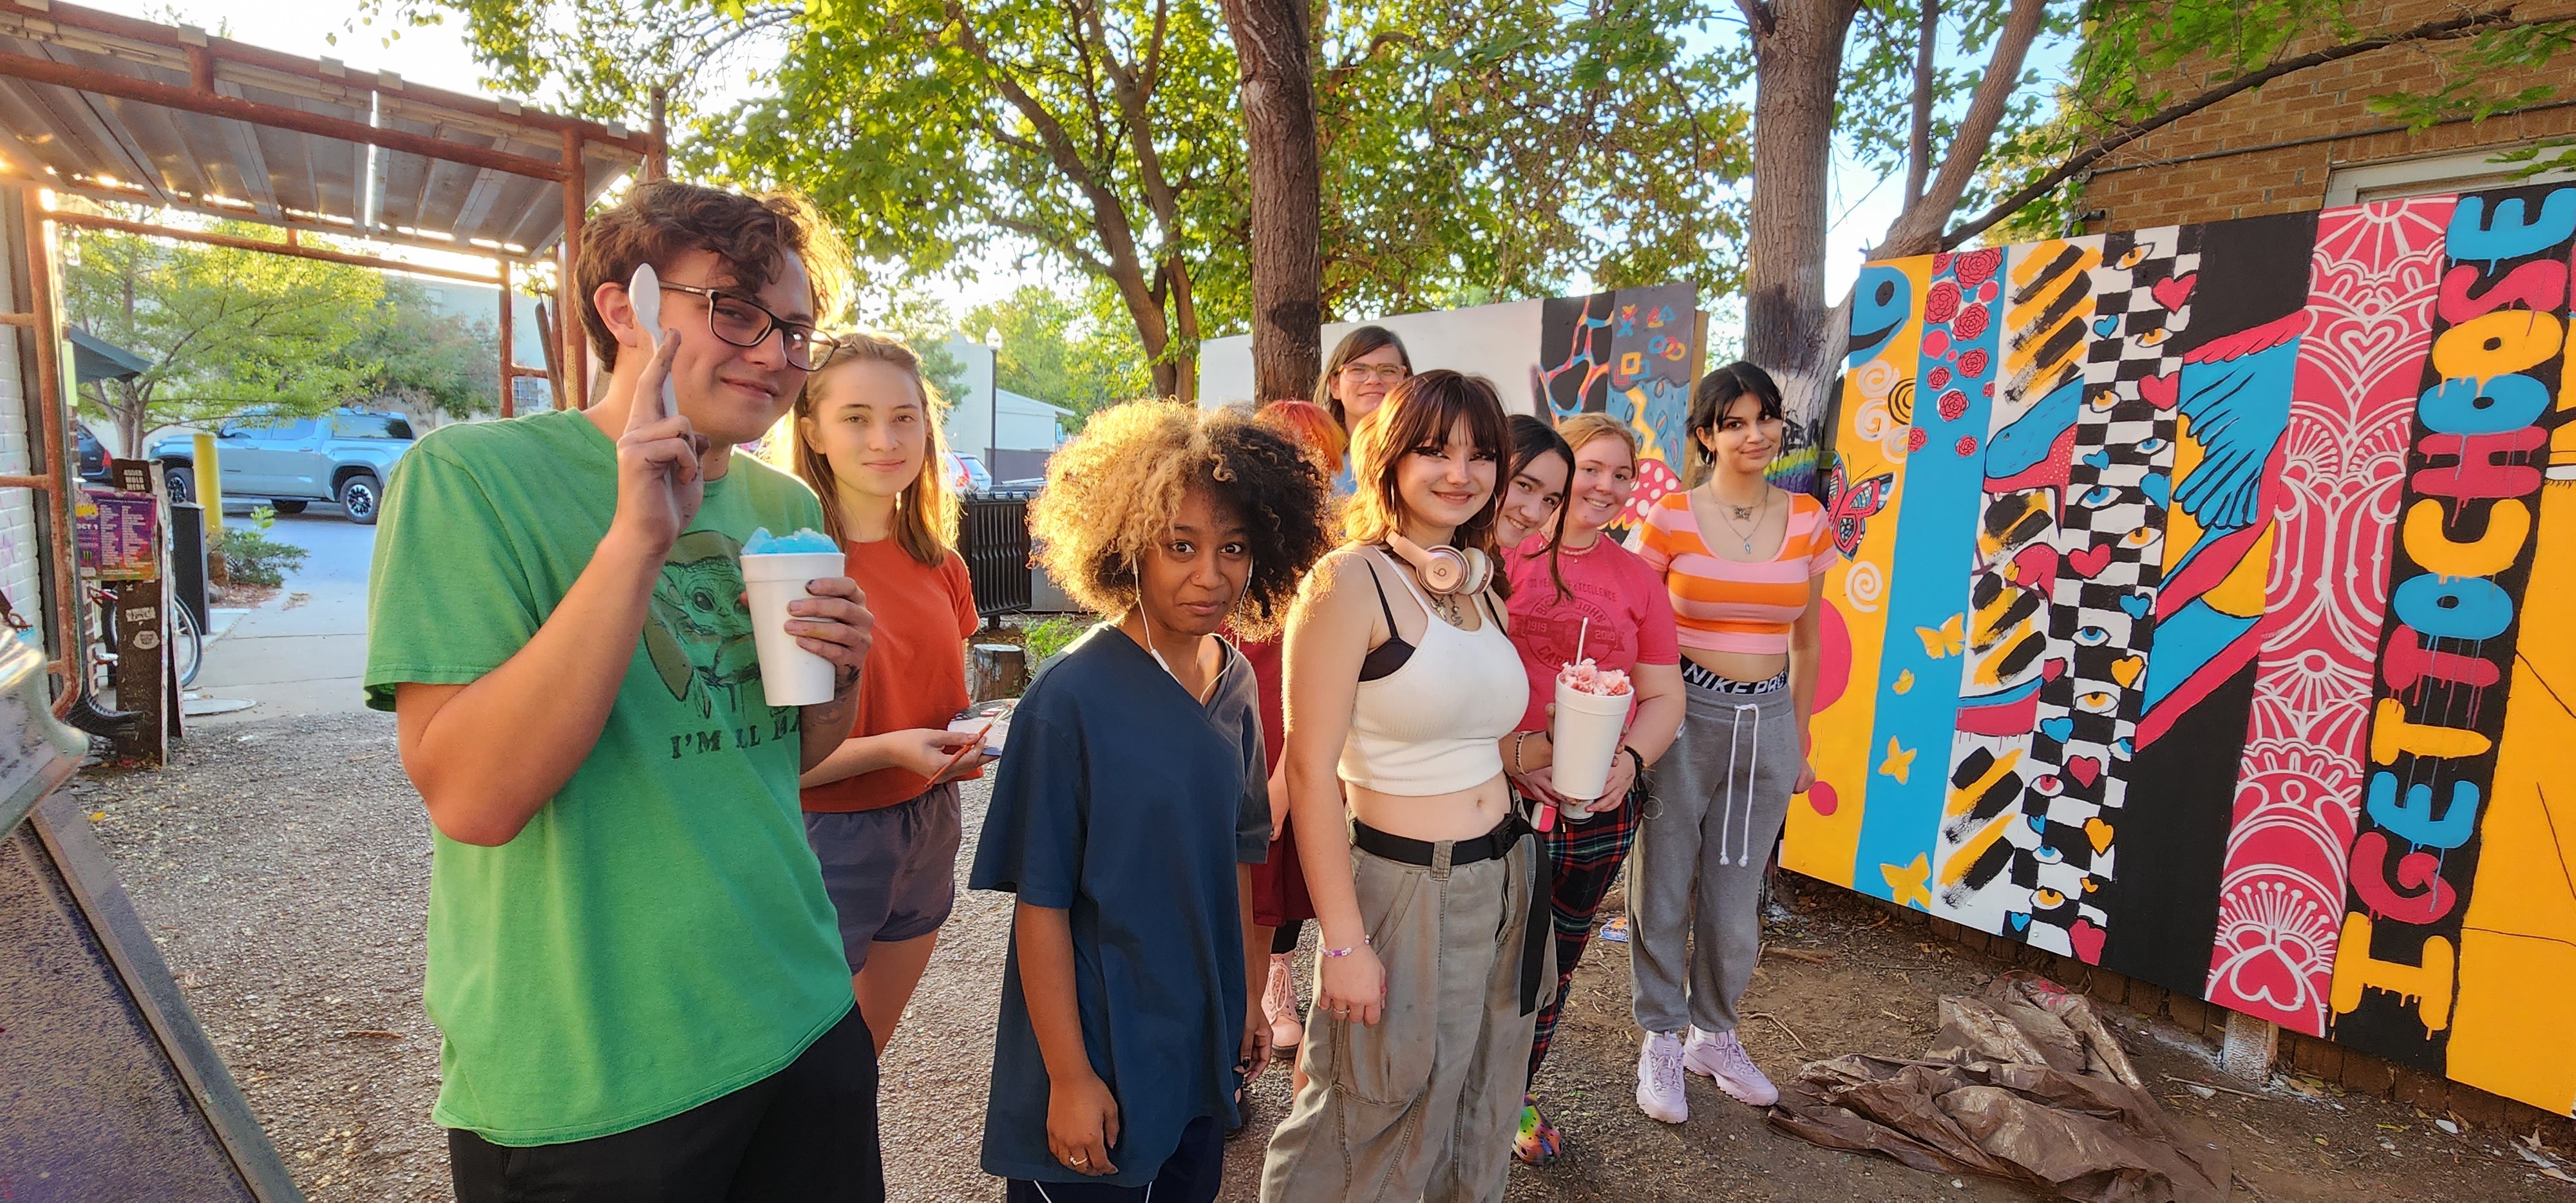 A group of teenagers stand outside next to a colorful mural. They all have snow cones and are smiling at the camera.